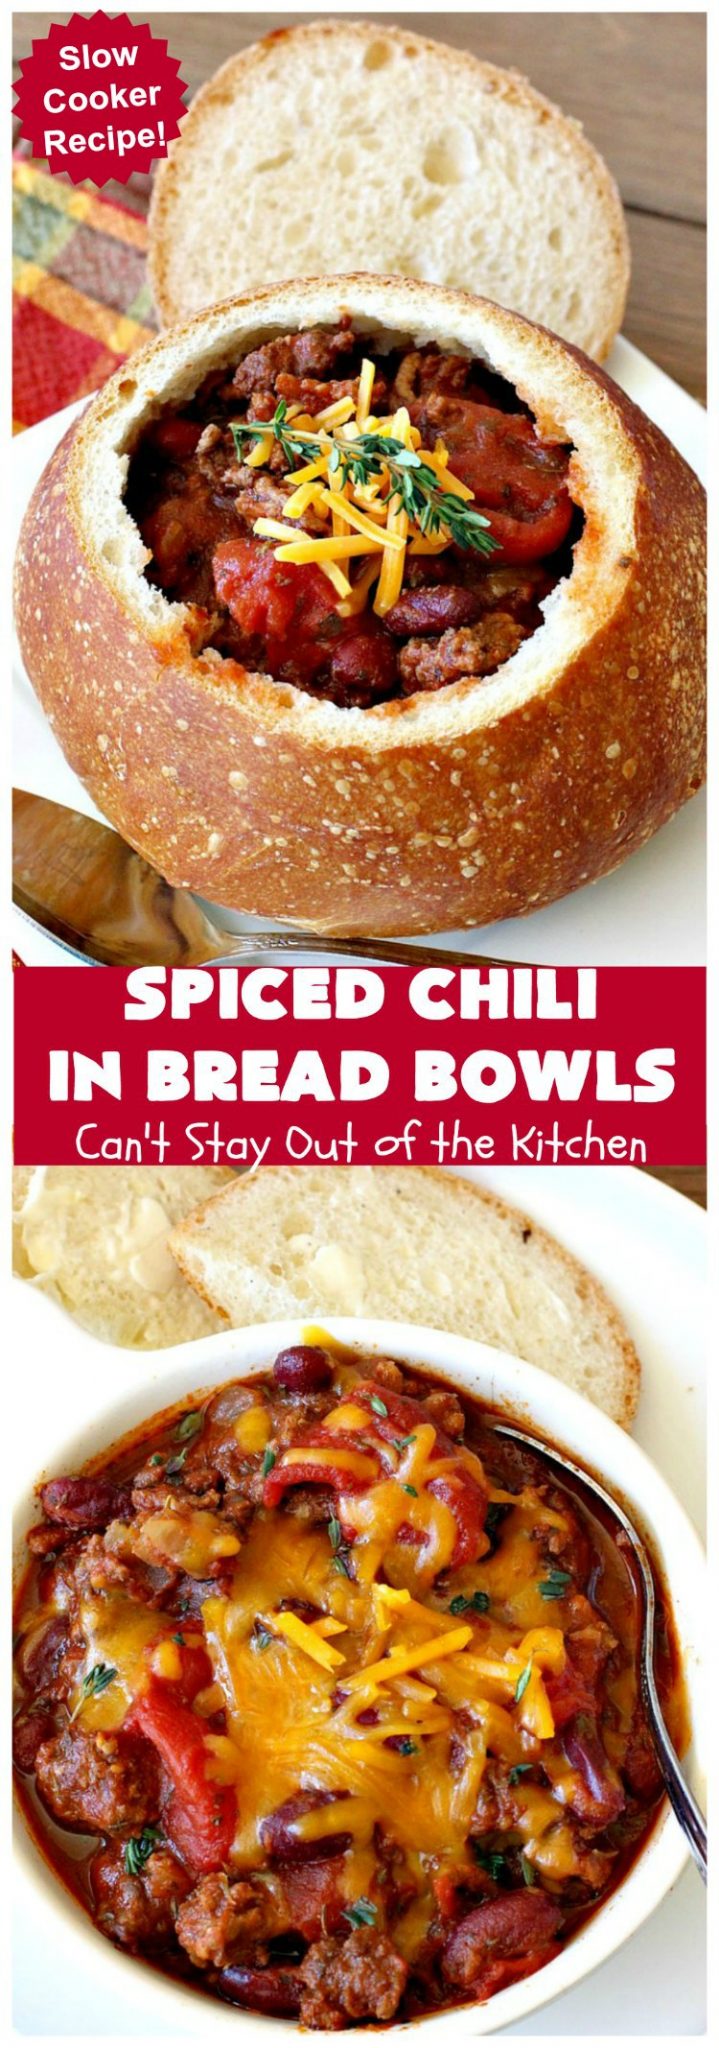 Spiced Chili In Bread Bowls Collage 1 719x2048 